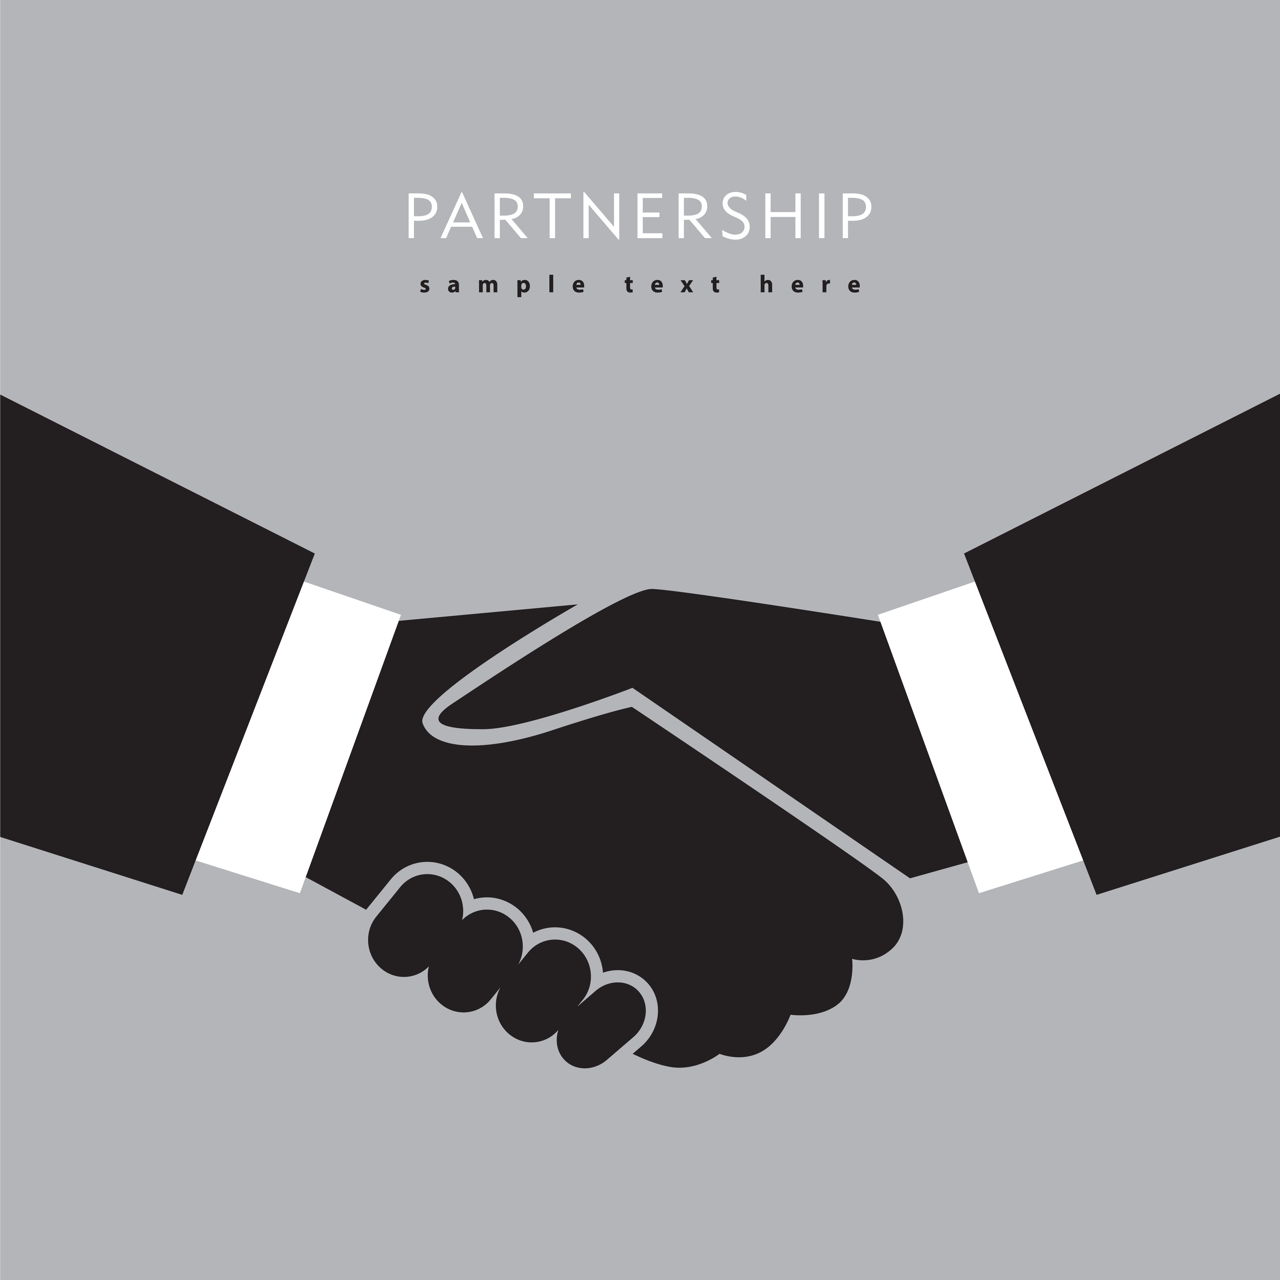 What is the Difference Between a Sole Trader and a Partnership